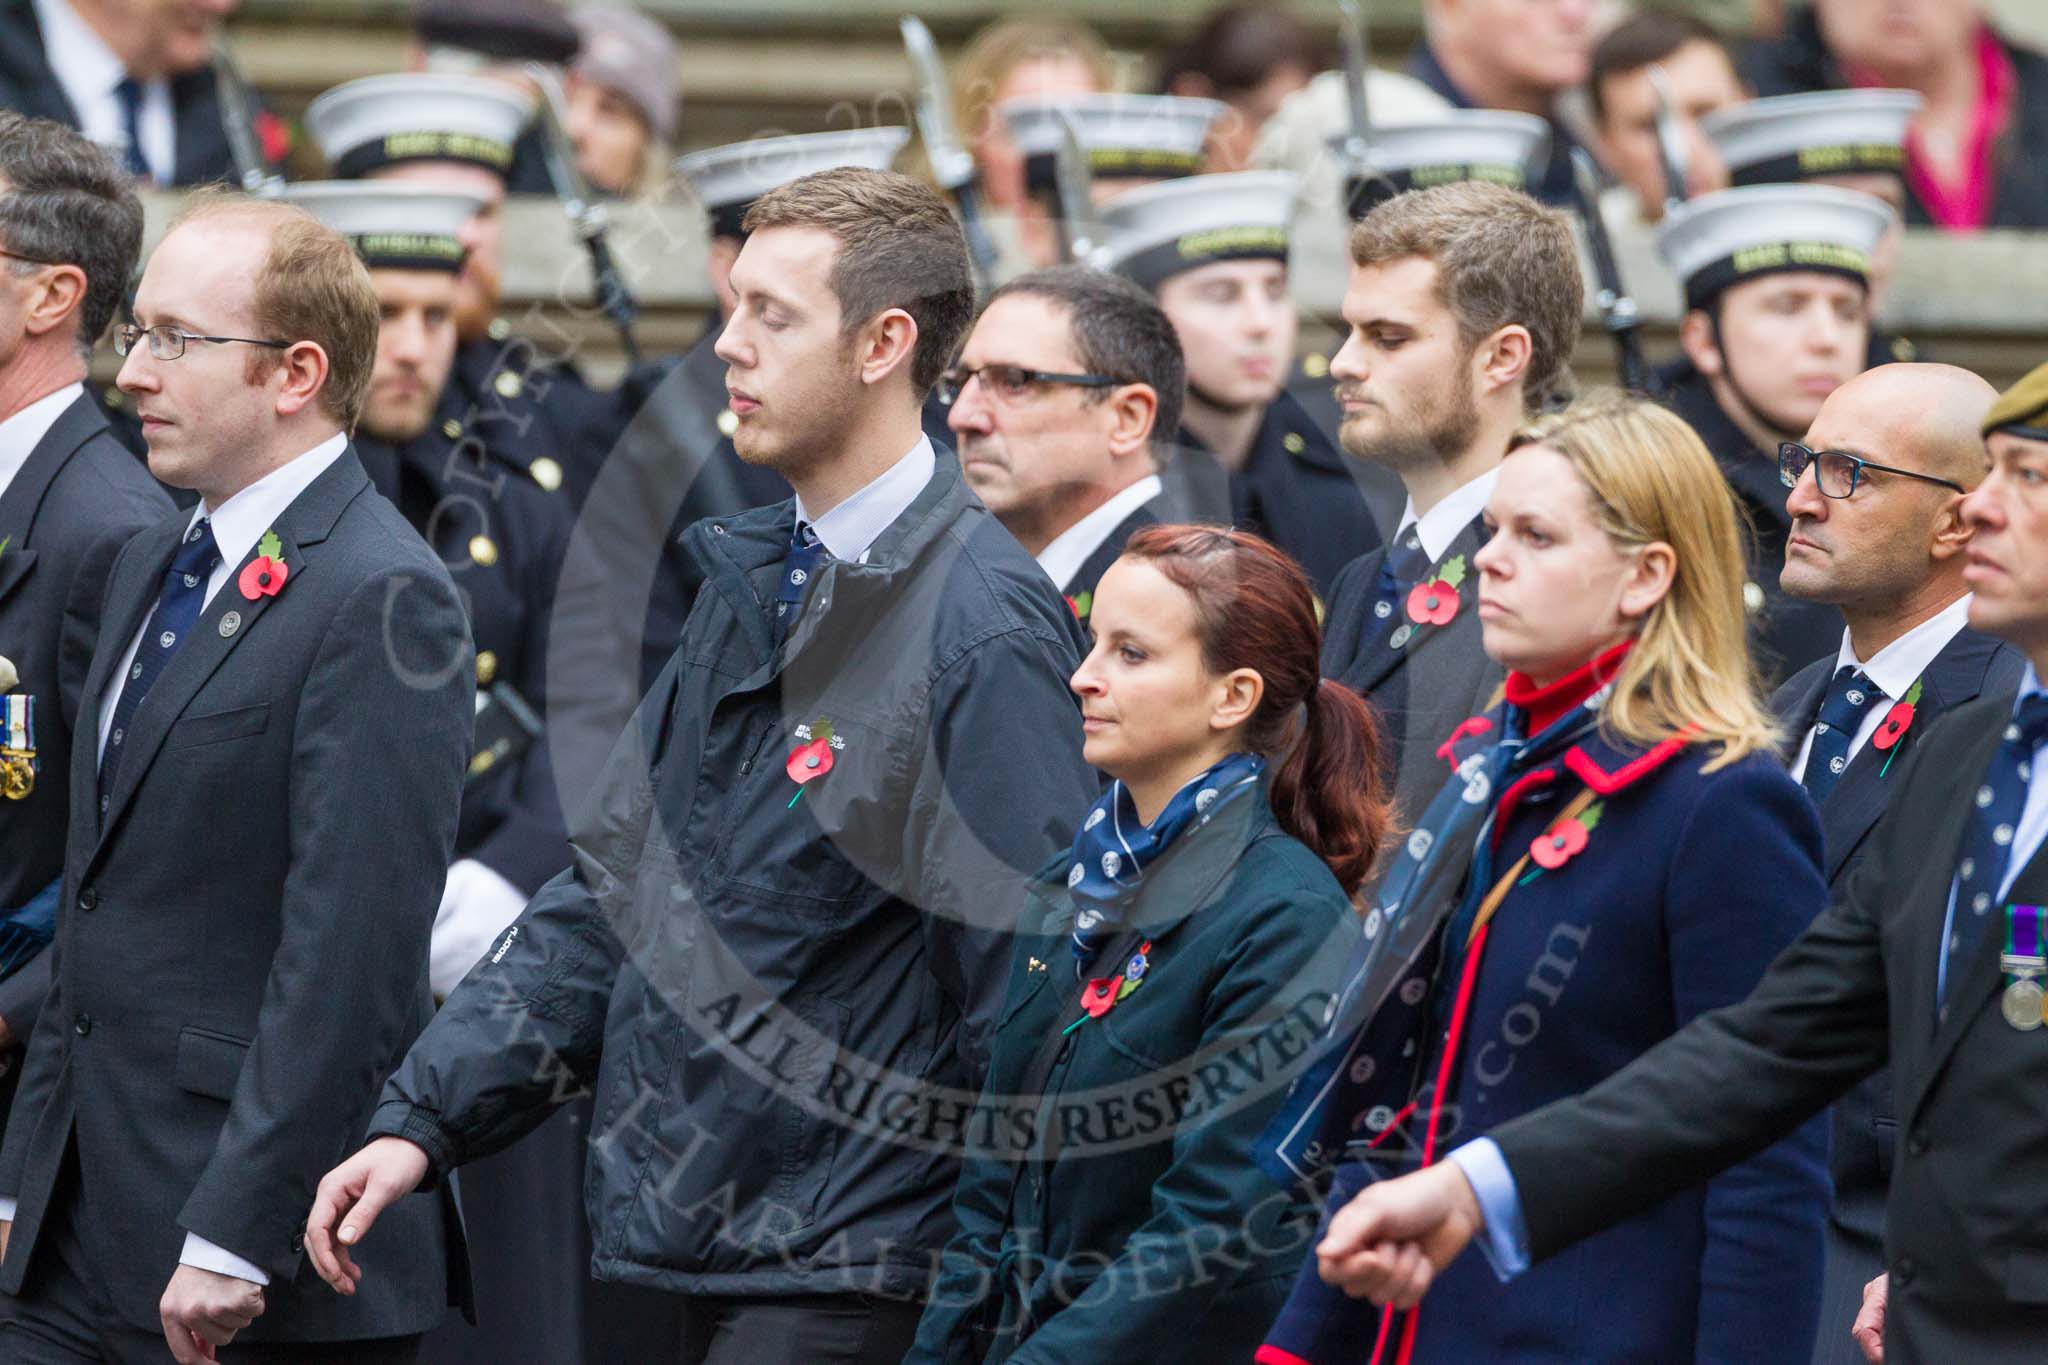 Remembrance Sunday at the Cenotaph 2015: Group M21, Commonwealth War Graves Commission.
Cenotaph, Whitehall, London SW1,
London,
Greater London,
United Kingdom,
on 08 November 2015 at 12:17, image #1545